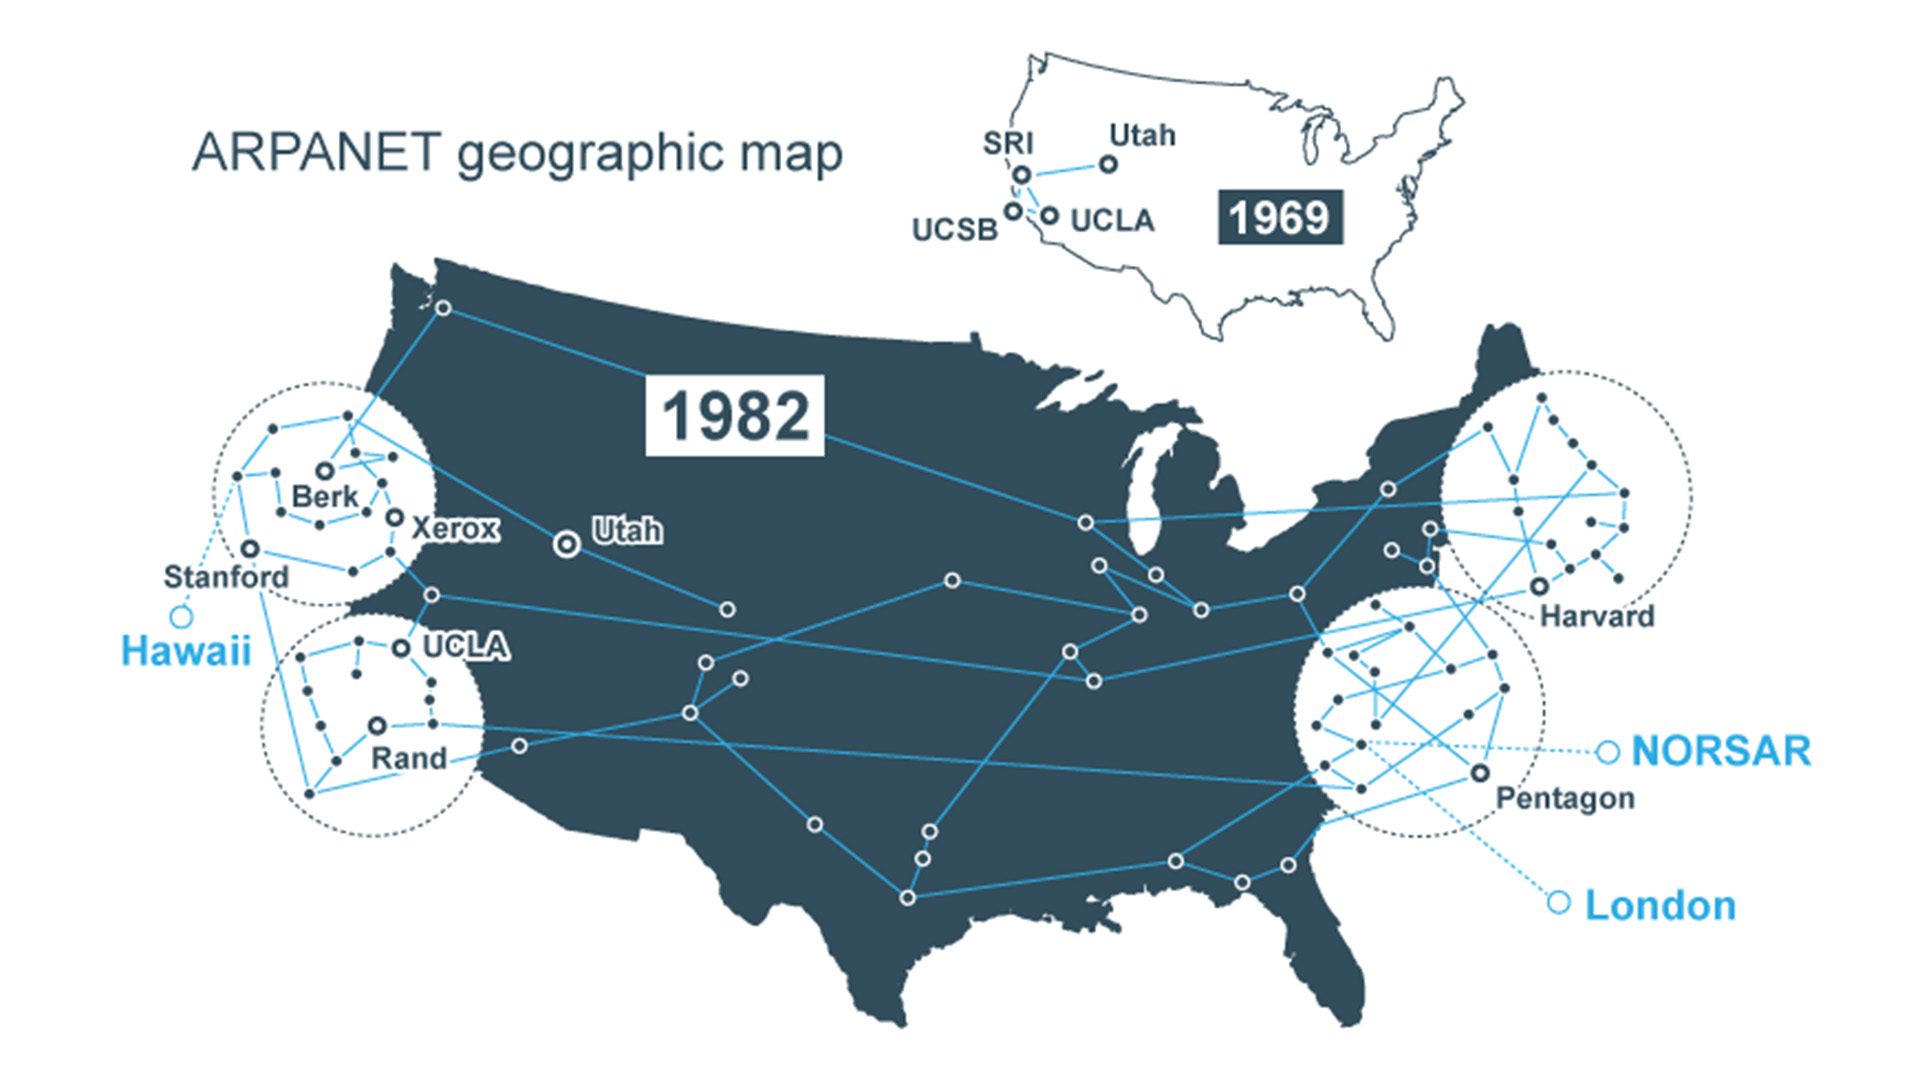 ARPANET geographic map across the united states